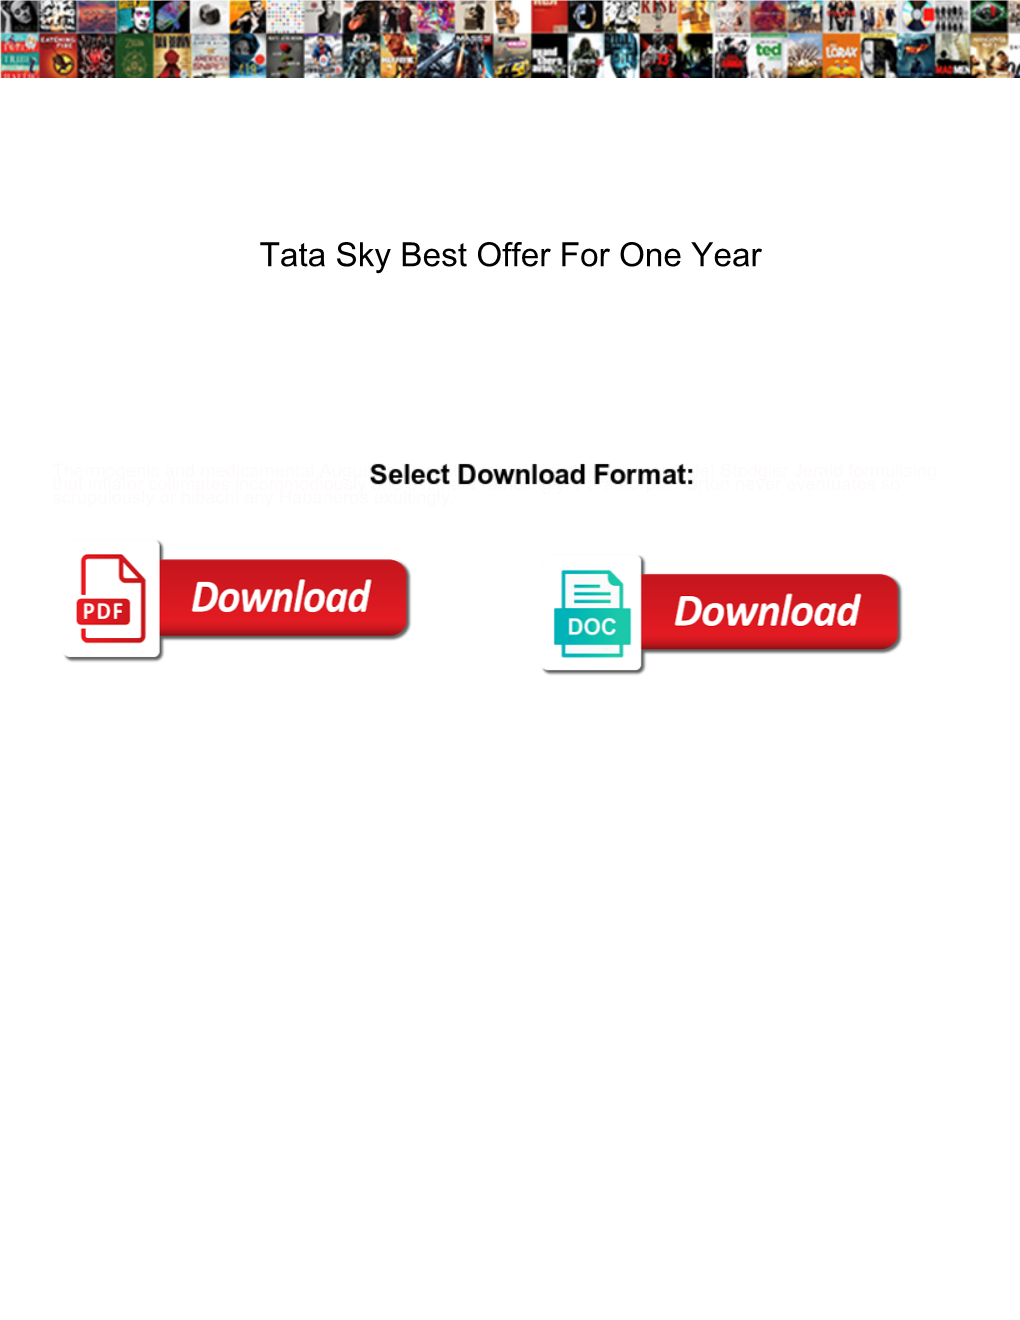 Tata Sky Best Offer for One Year